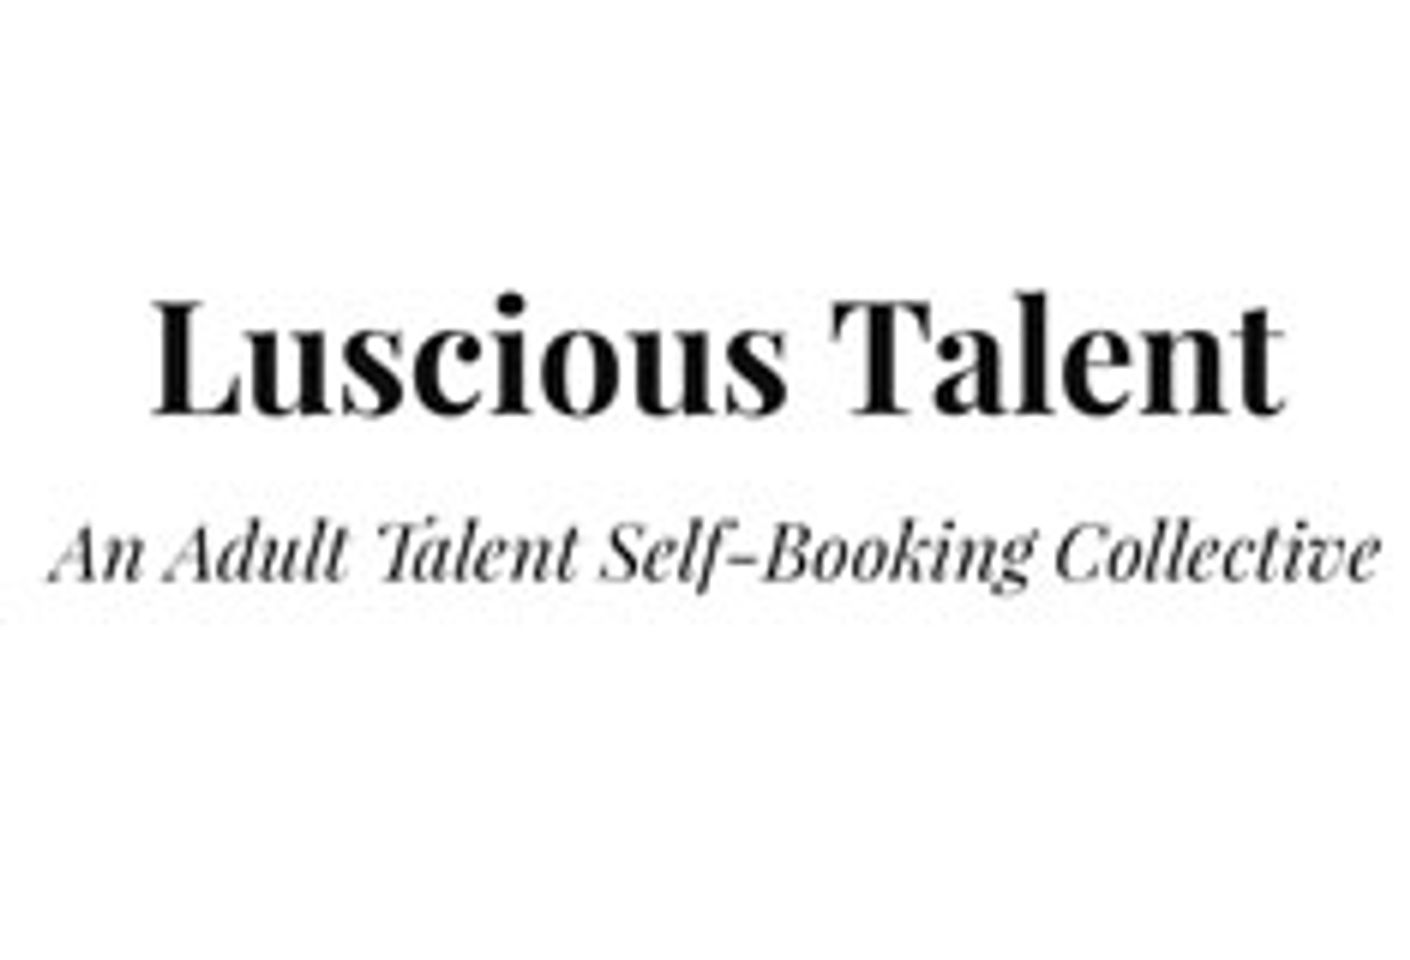 Luscious Talent To Provide Self-Booking Models With Resources Sans Contract